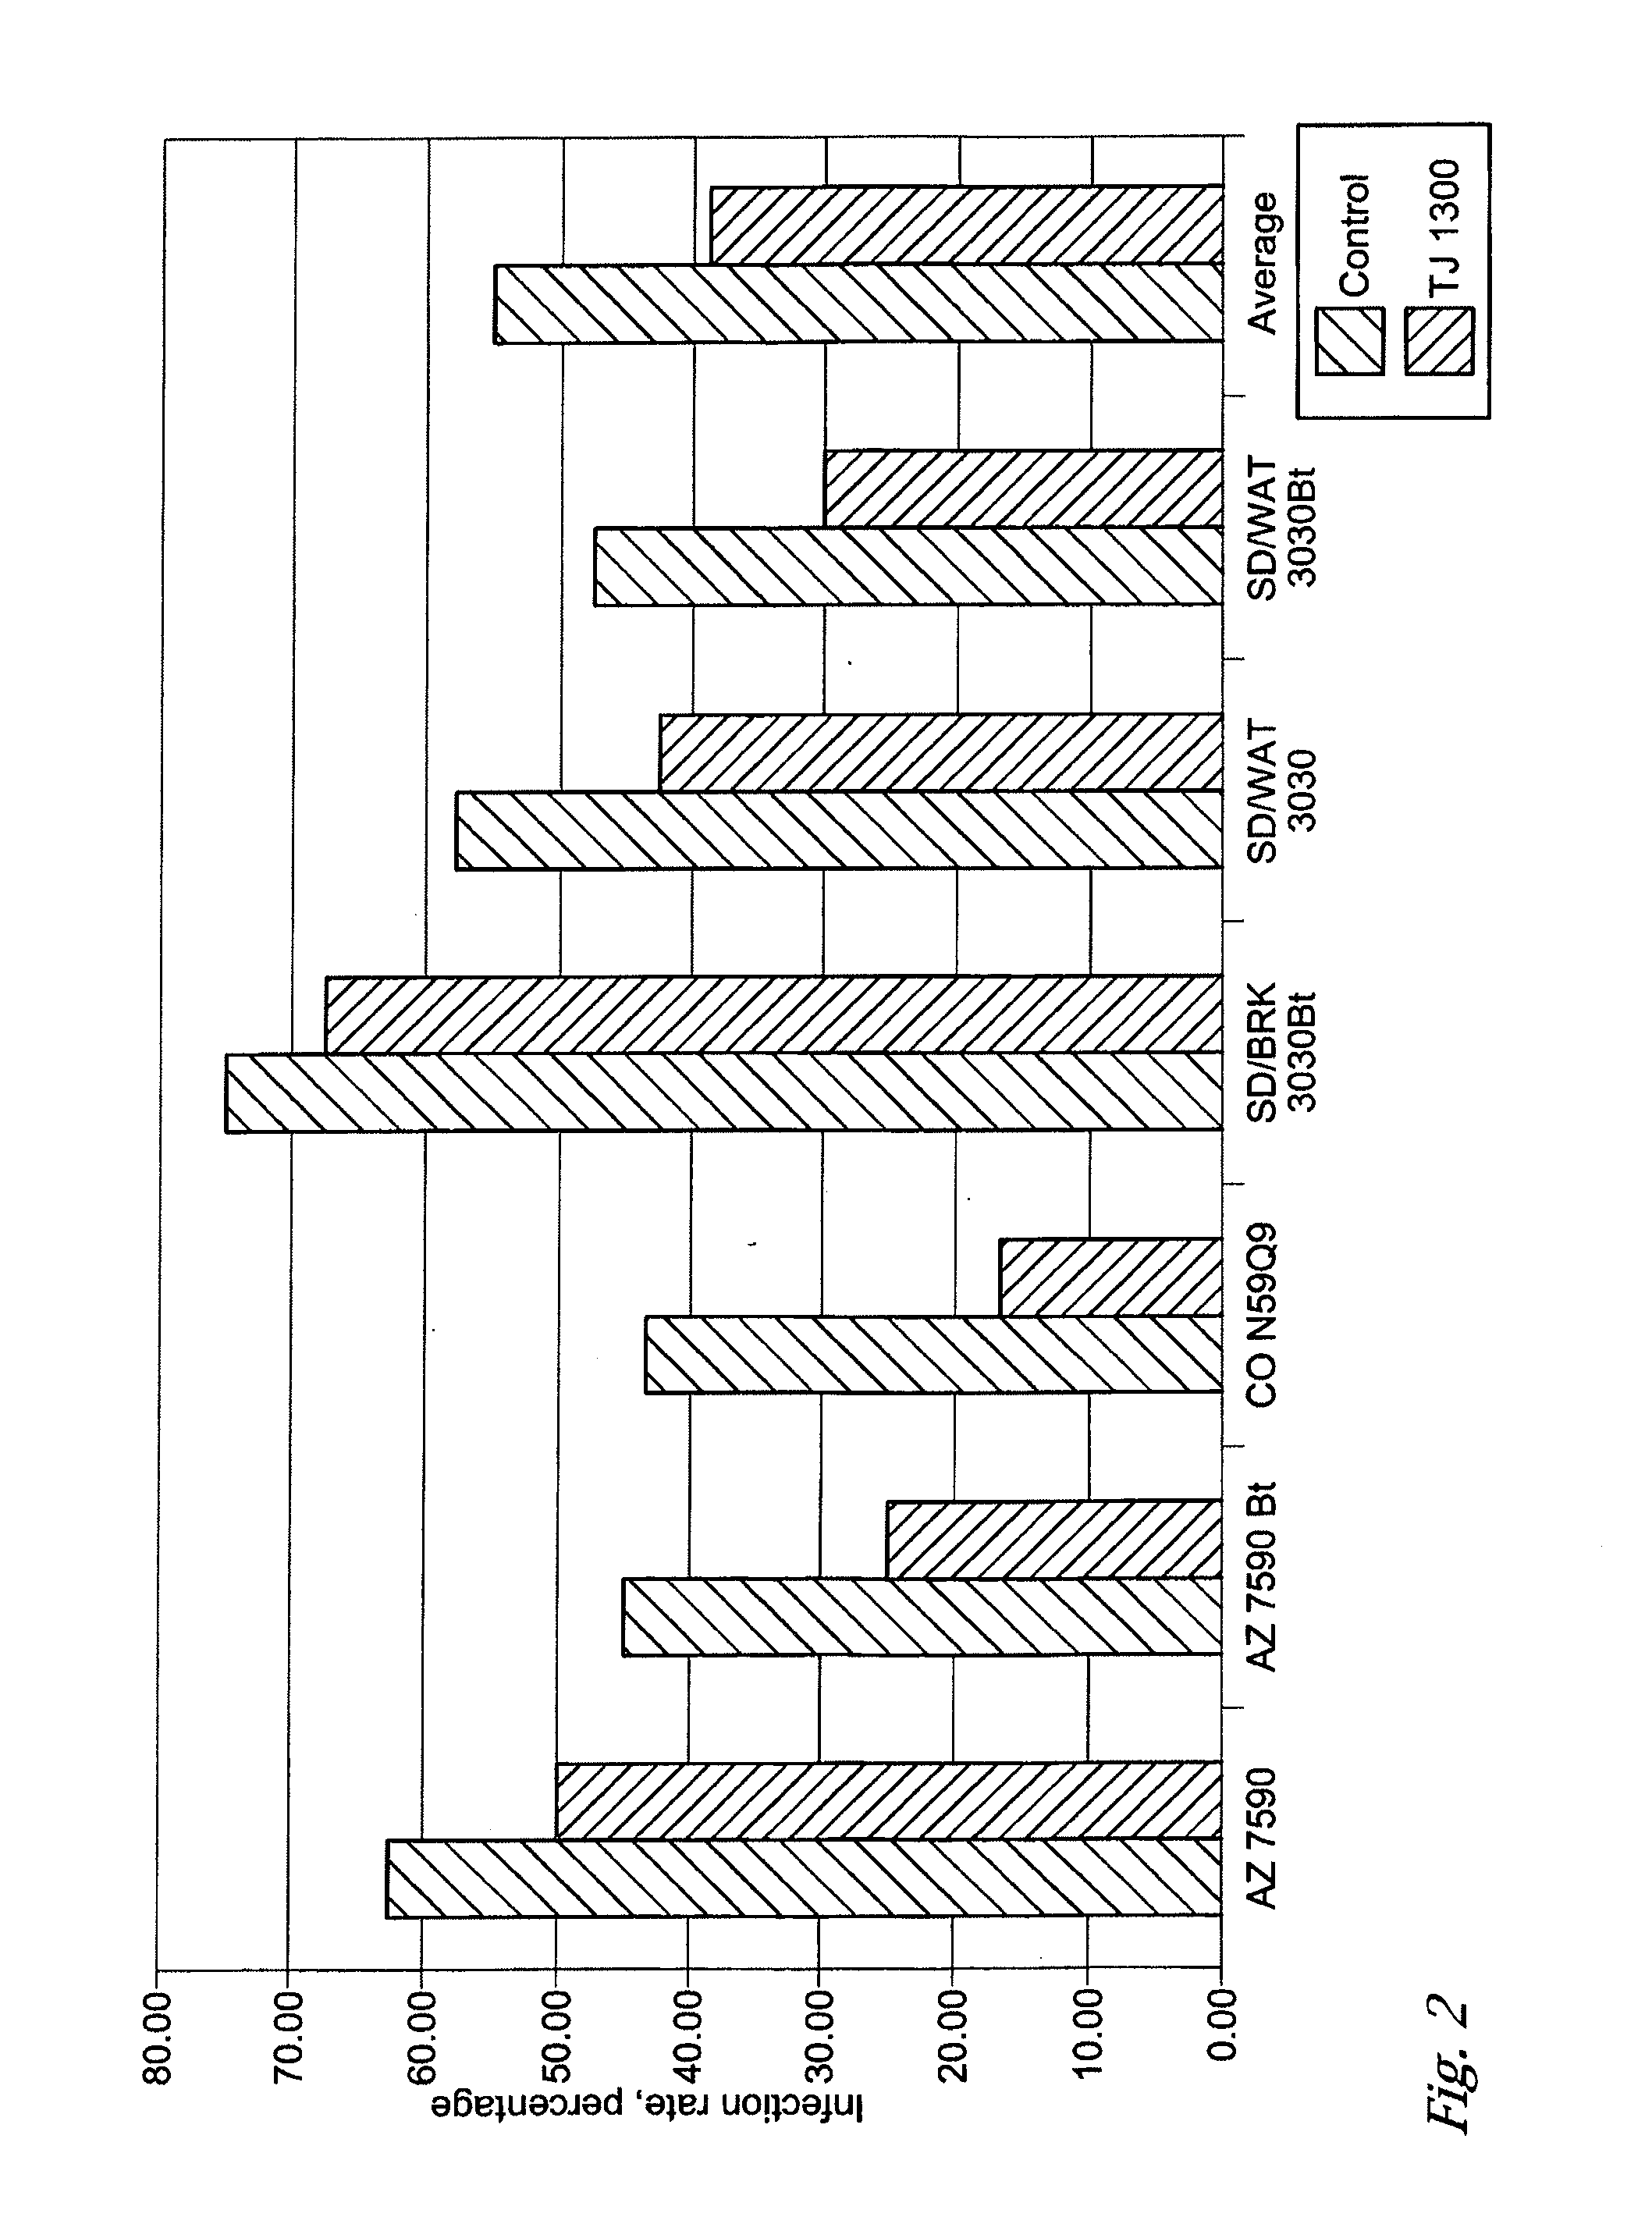 Plant seed assemblies comprising fungal/bacterial antagonists